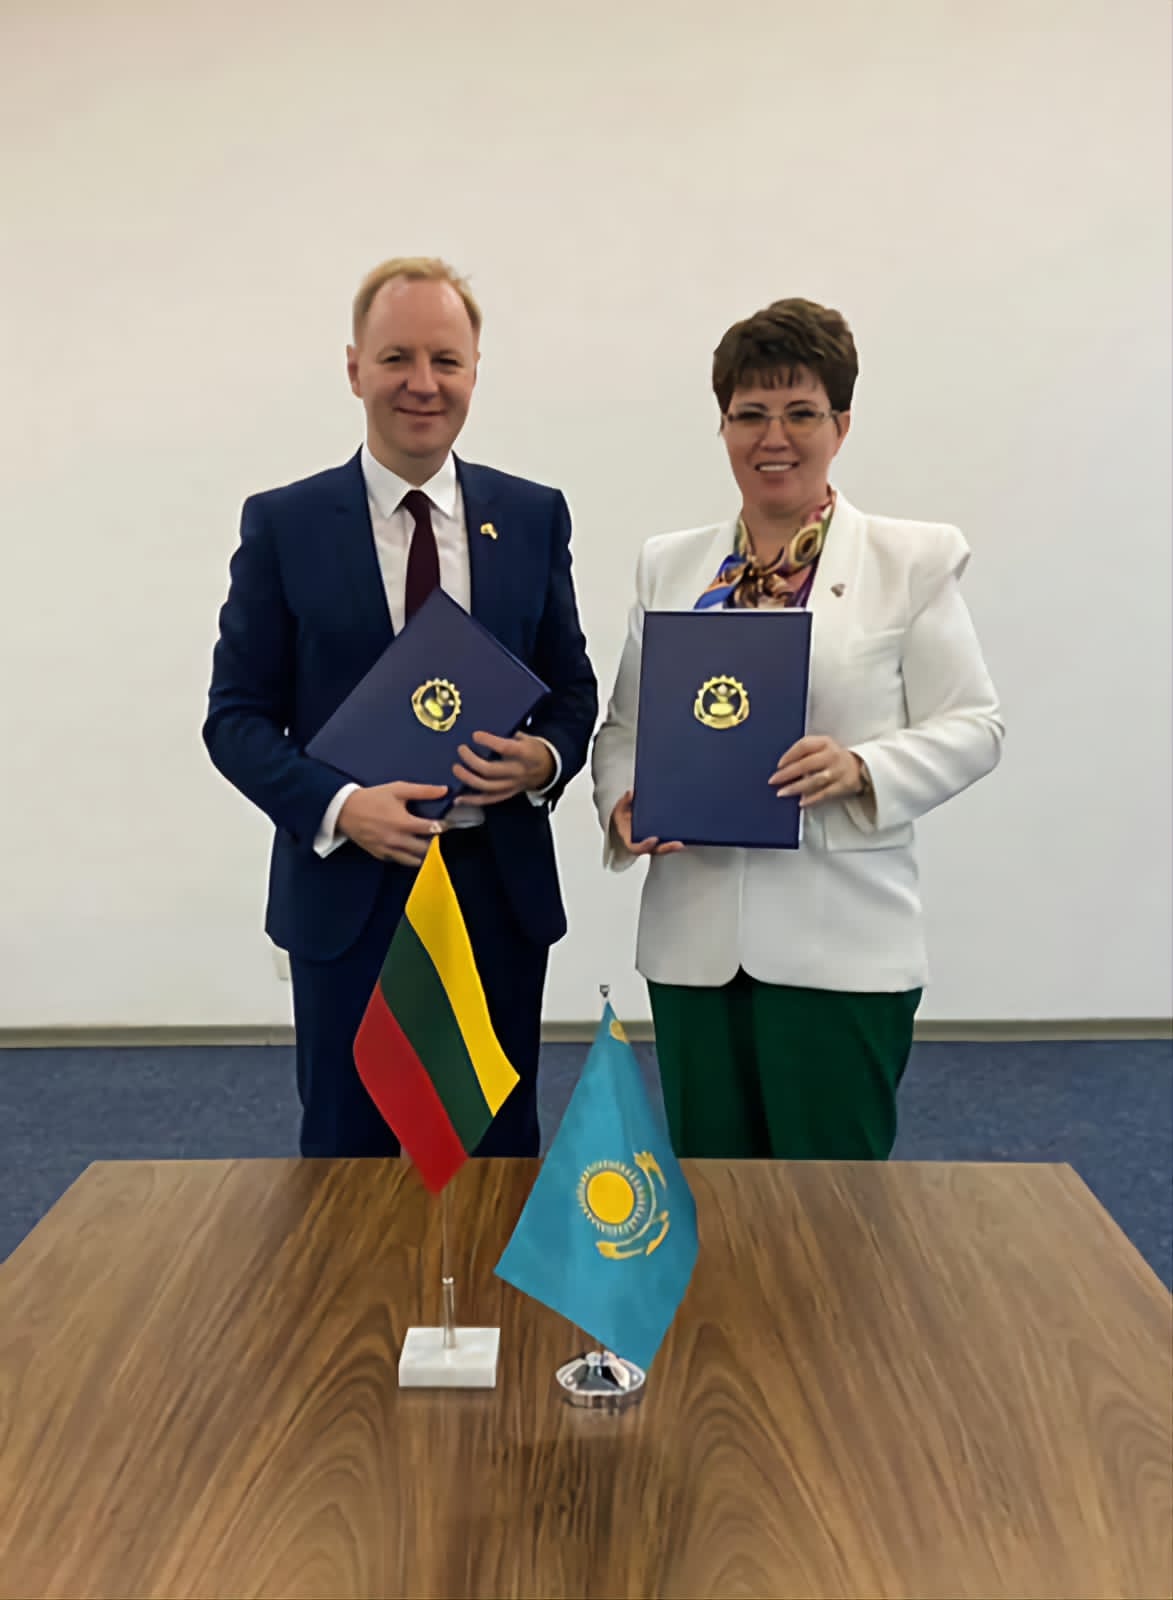 The Chairwoman of the Accounts Committee signed a Memorandum of Understanding with the National Audit Office of Lithuania